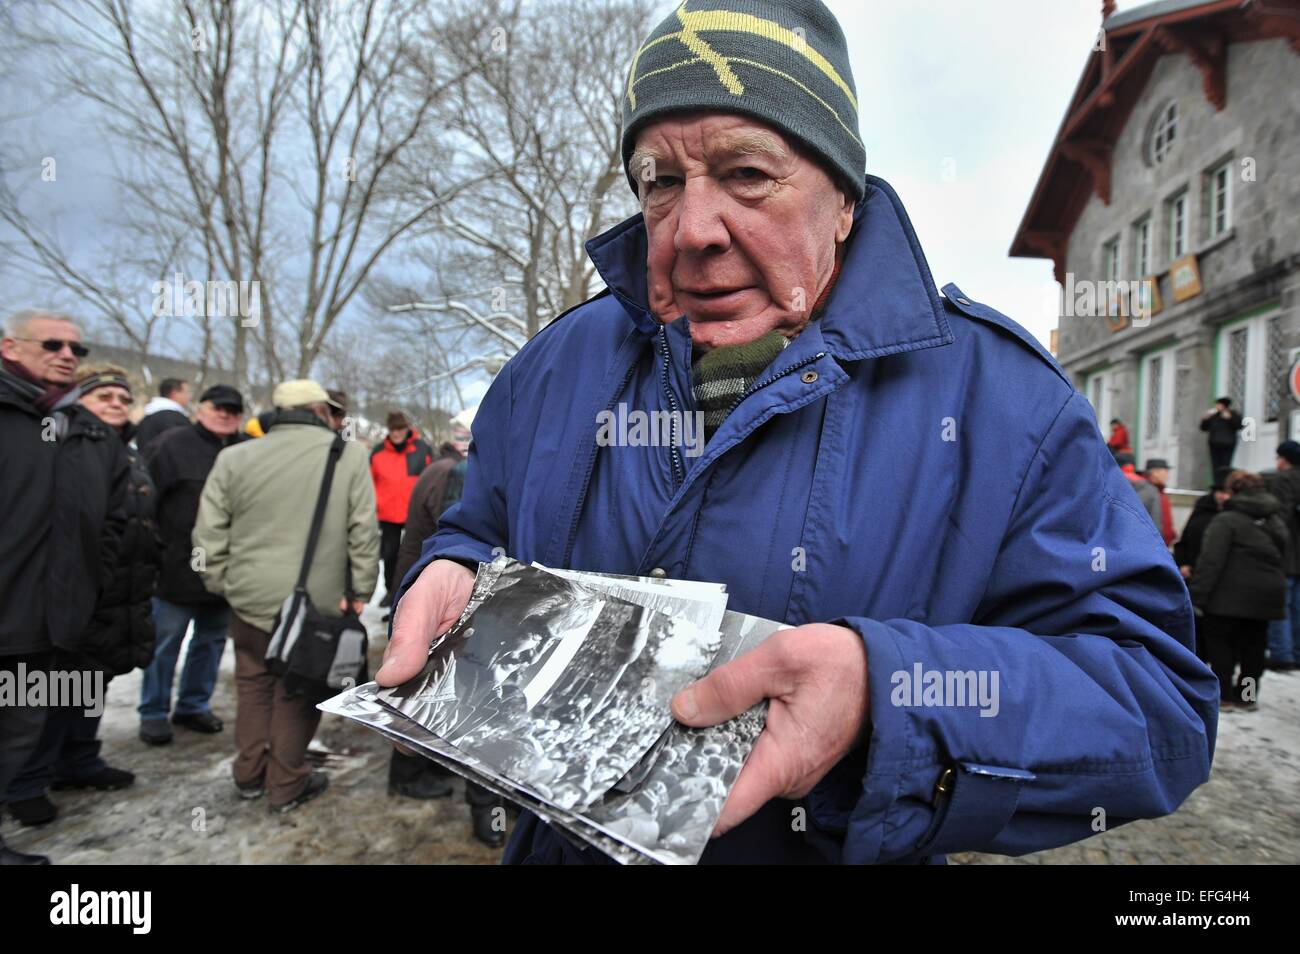 Witness Emil Kintzl shows historical pictures during the event marking the 25th anniversary of the opening of the border between Czechoslovakia and Bavaria. About 700 people arrived in the village Zelezna Ruda, Czech Republic, on Tuesday, February 3, 2015. In 1990, 70,000 people came to the road border crossing to cut the barbed wire barrier, which was part of the Iron Curtain, and tried to make a human chain from Zelezna Ruda to 3 kilometers distant Bayerisch Eisenstein. The village underwent great changes in the past 25 years because a military area had been on its territory and locals need Stock Photo